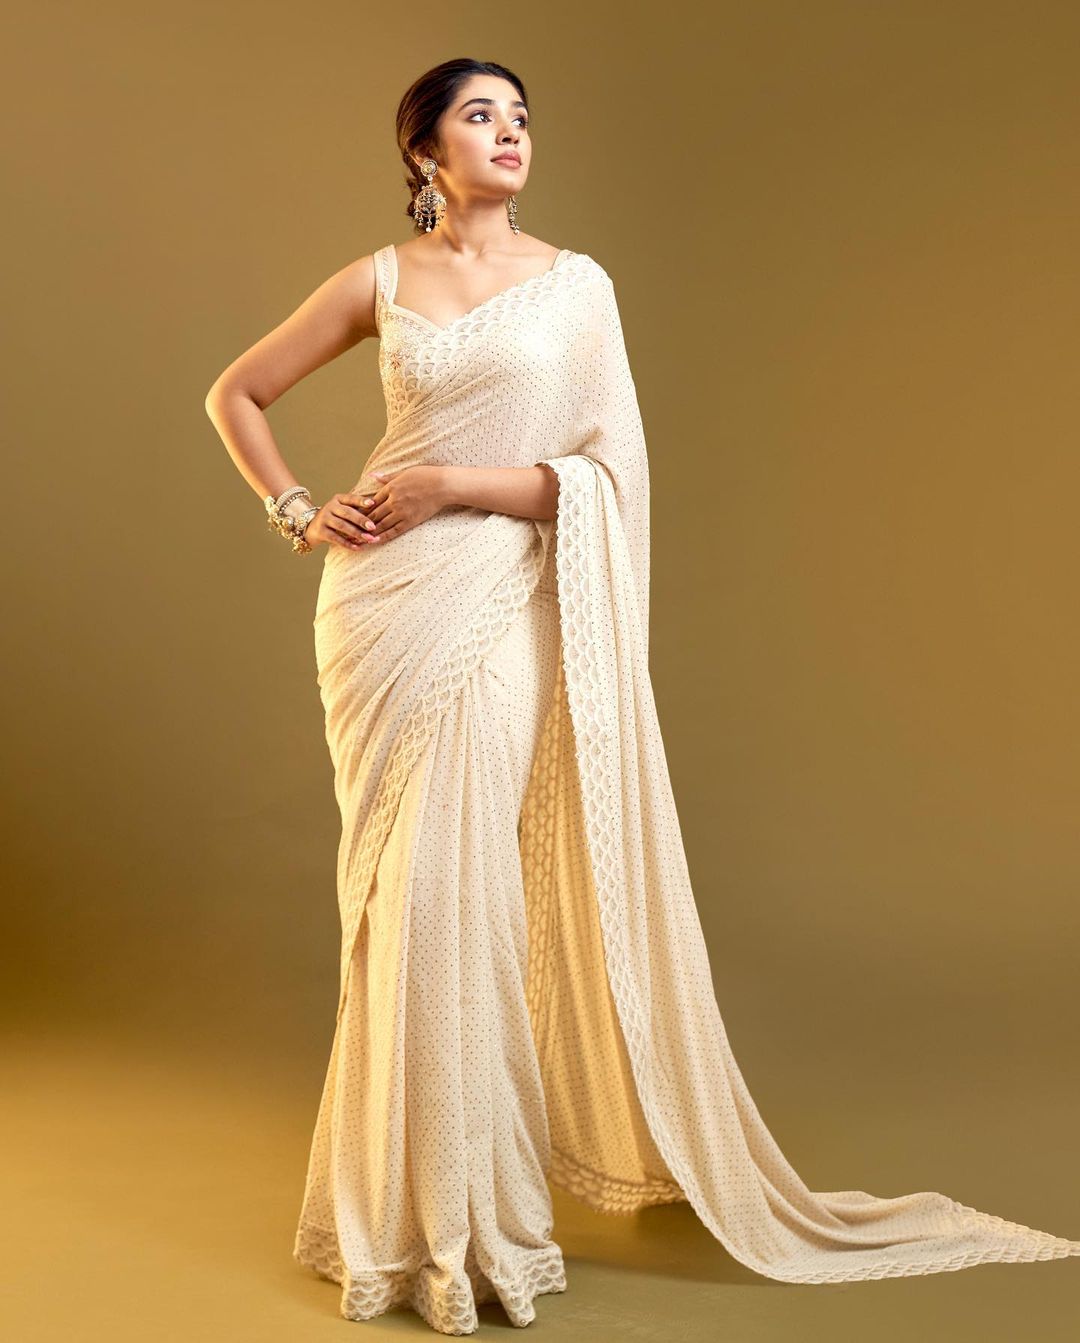 Krithi Shetty Classy Look In White Saree Krithi Shetty Setting Some Major Traditional and Ethnic Outfit Look Inspo